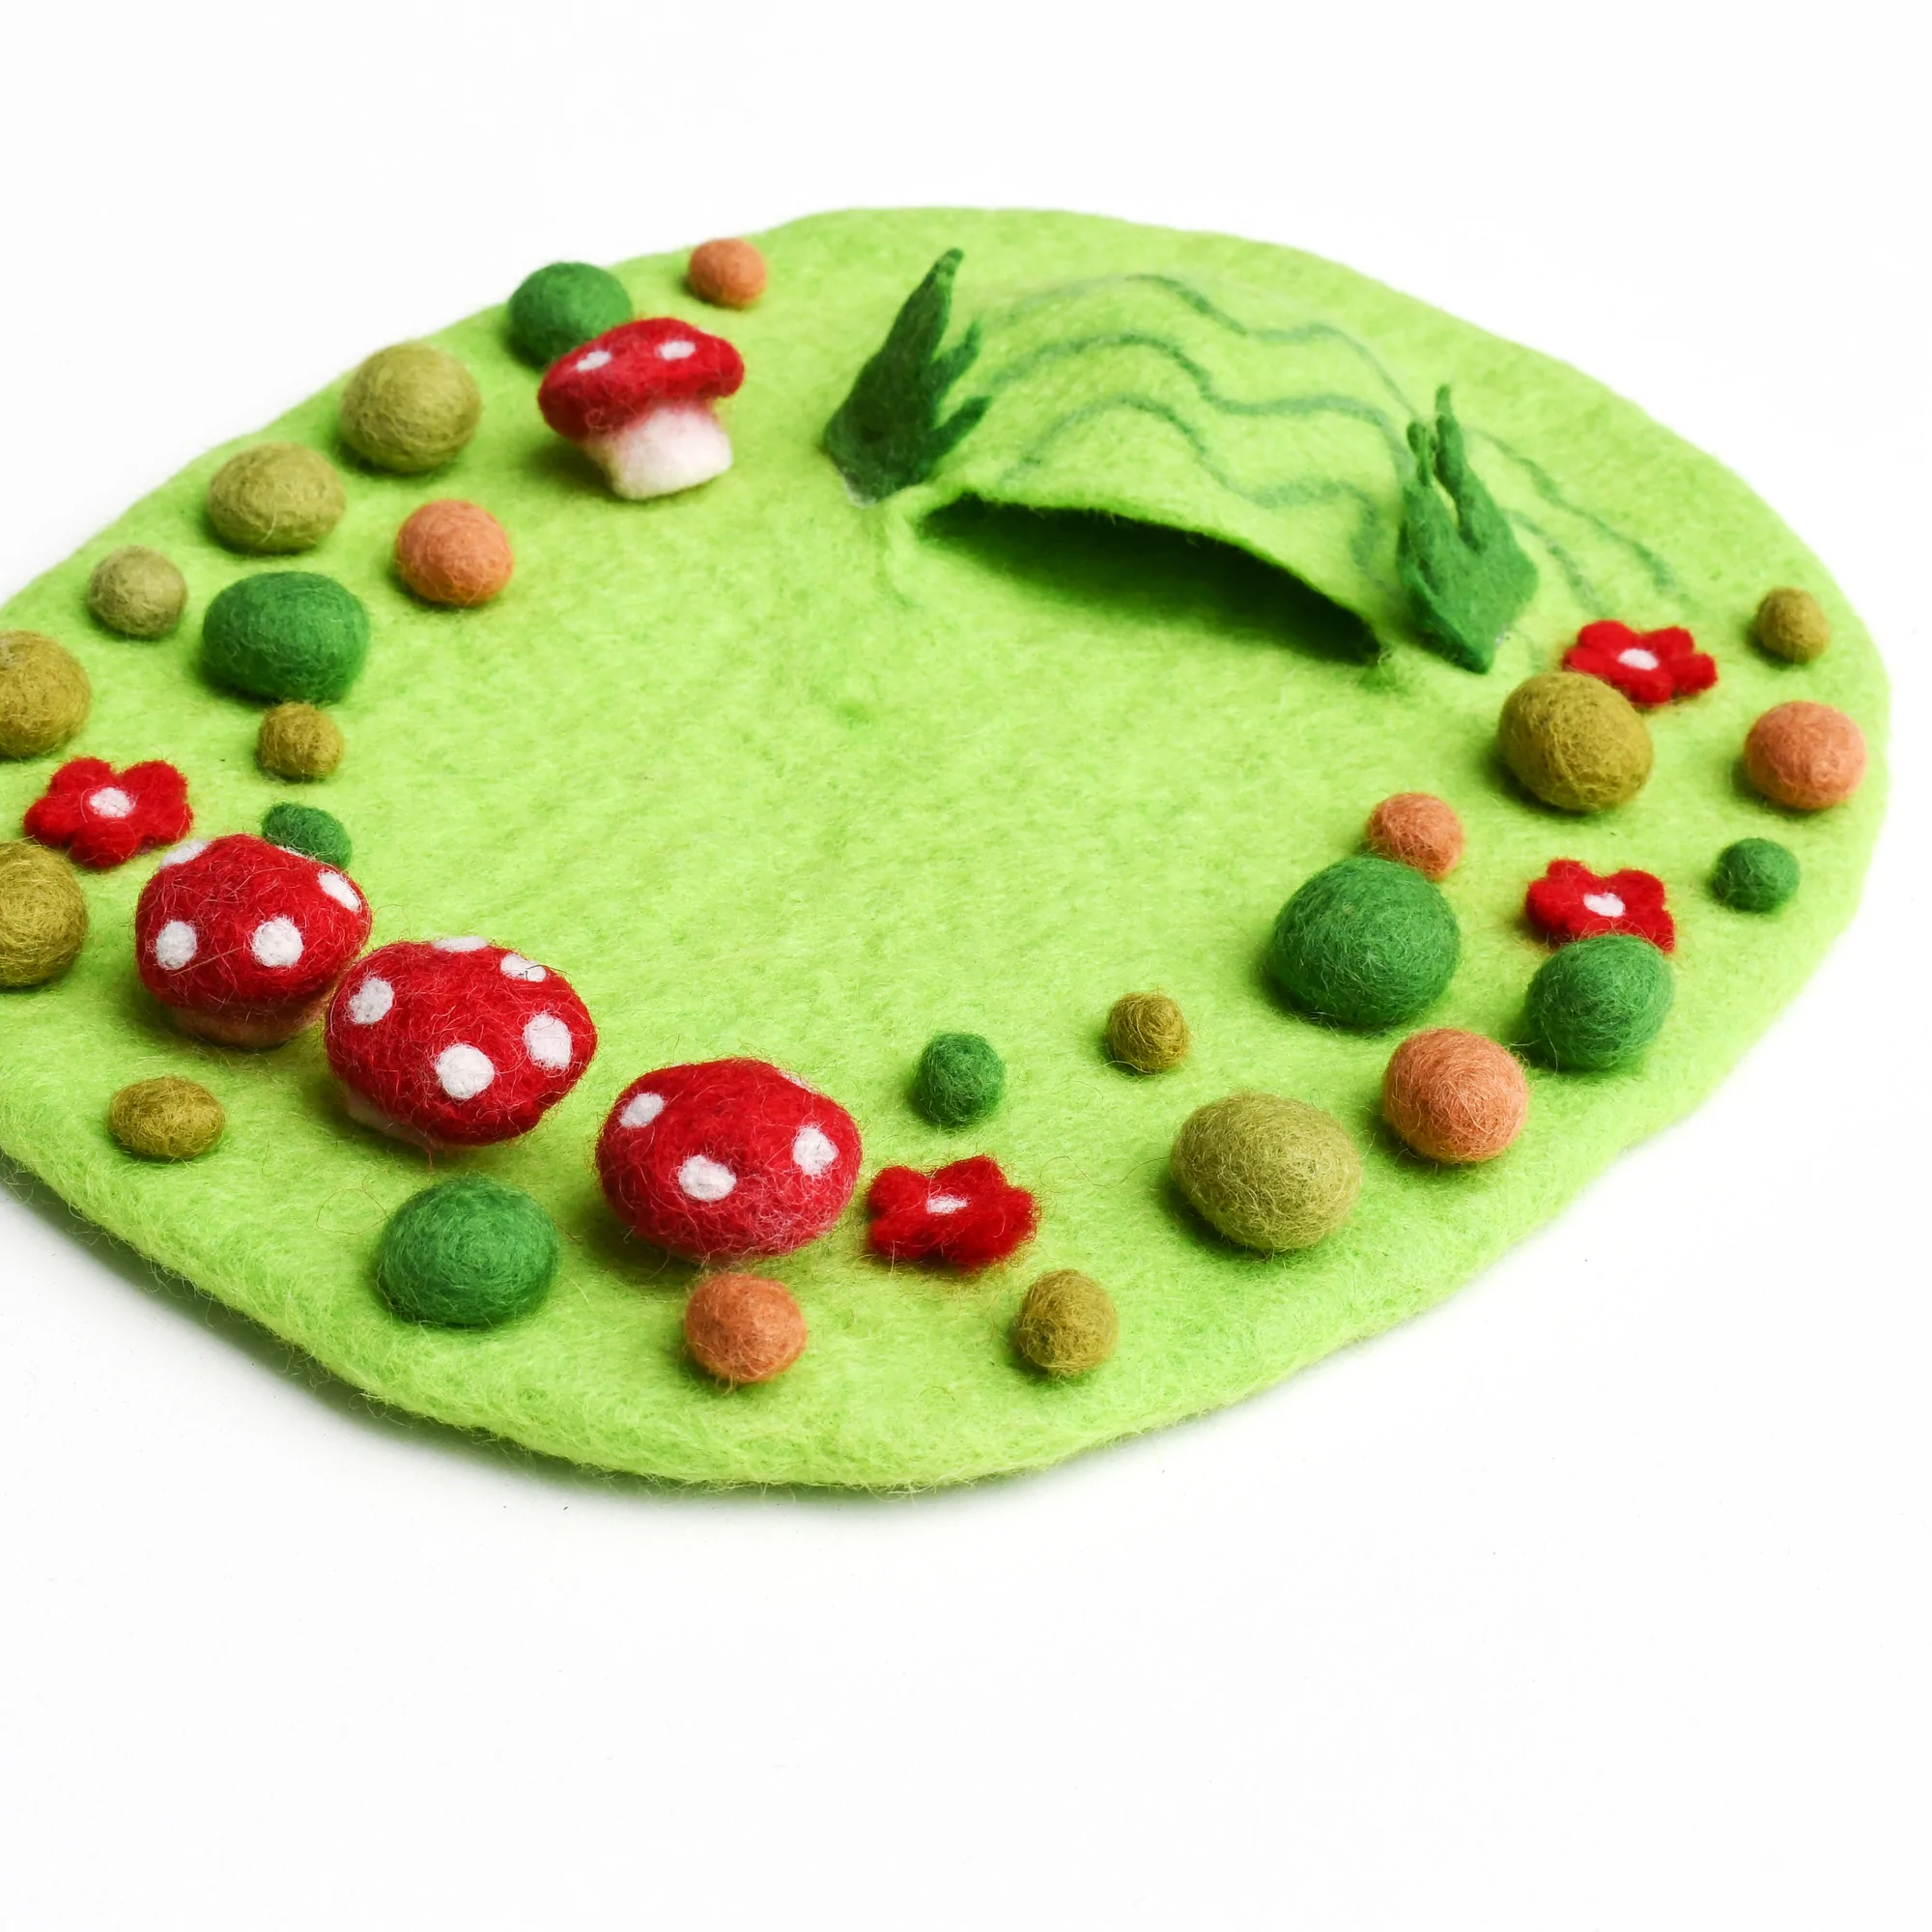 Folklore says fairies appear when there is a ring of toadstools. Our Fairy Toadstool Garden is made from wool felt and it features little toadstools, colourful rocks and a tiny cave for the critters to hide in.